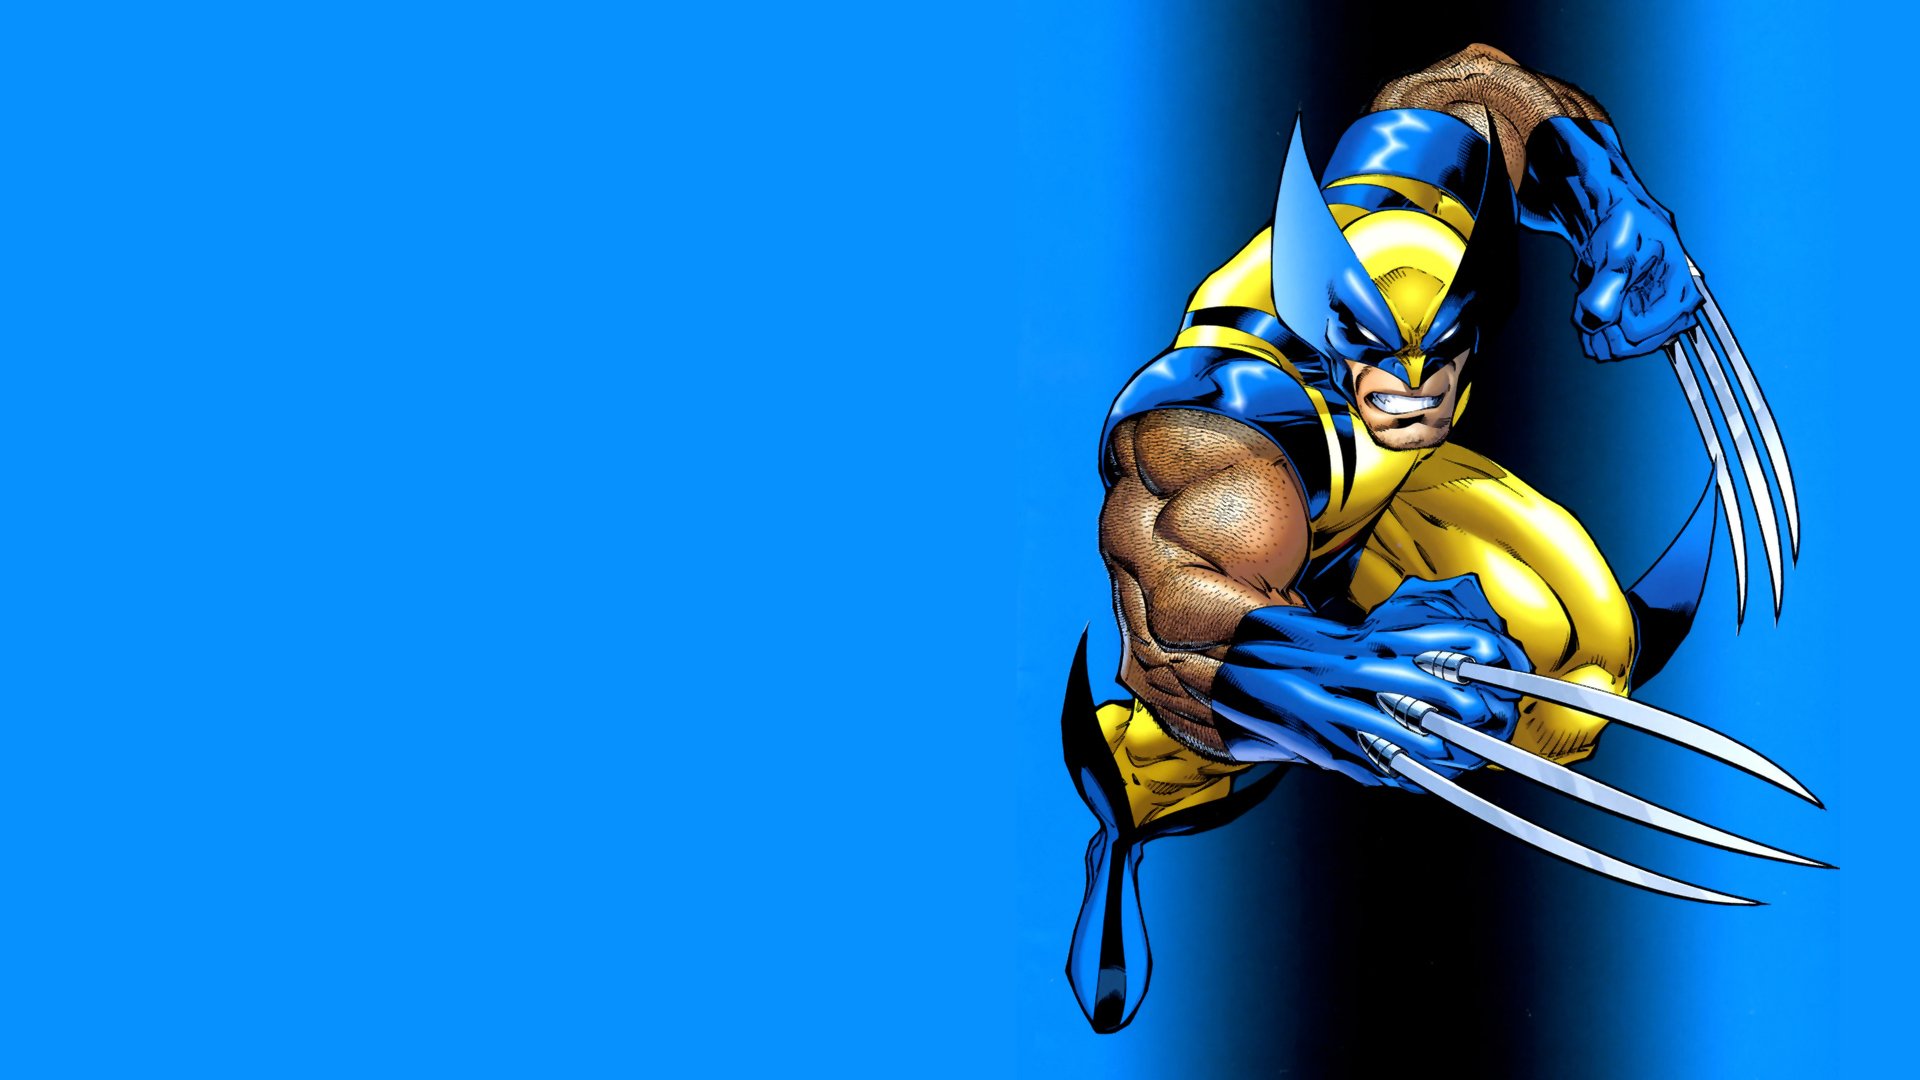 410+ Superhero HD Wallpapers and Backgrounds